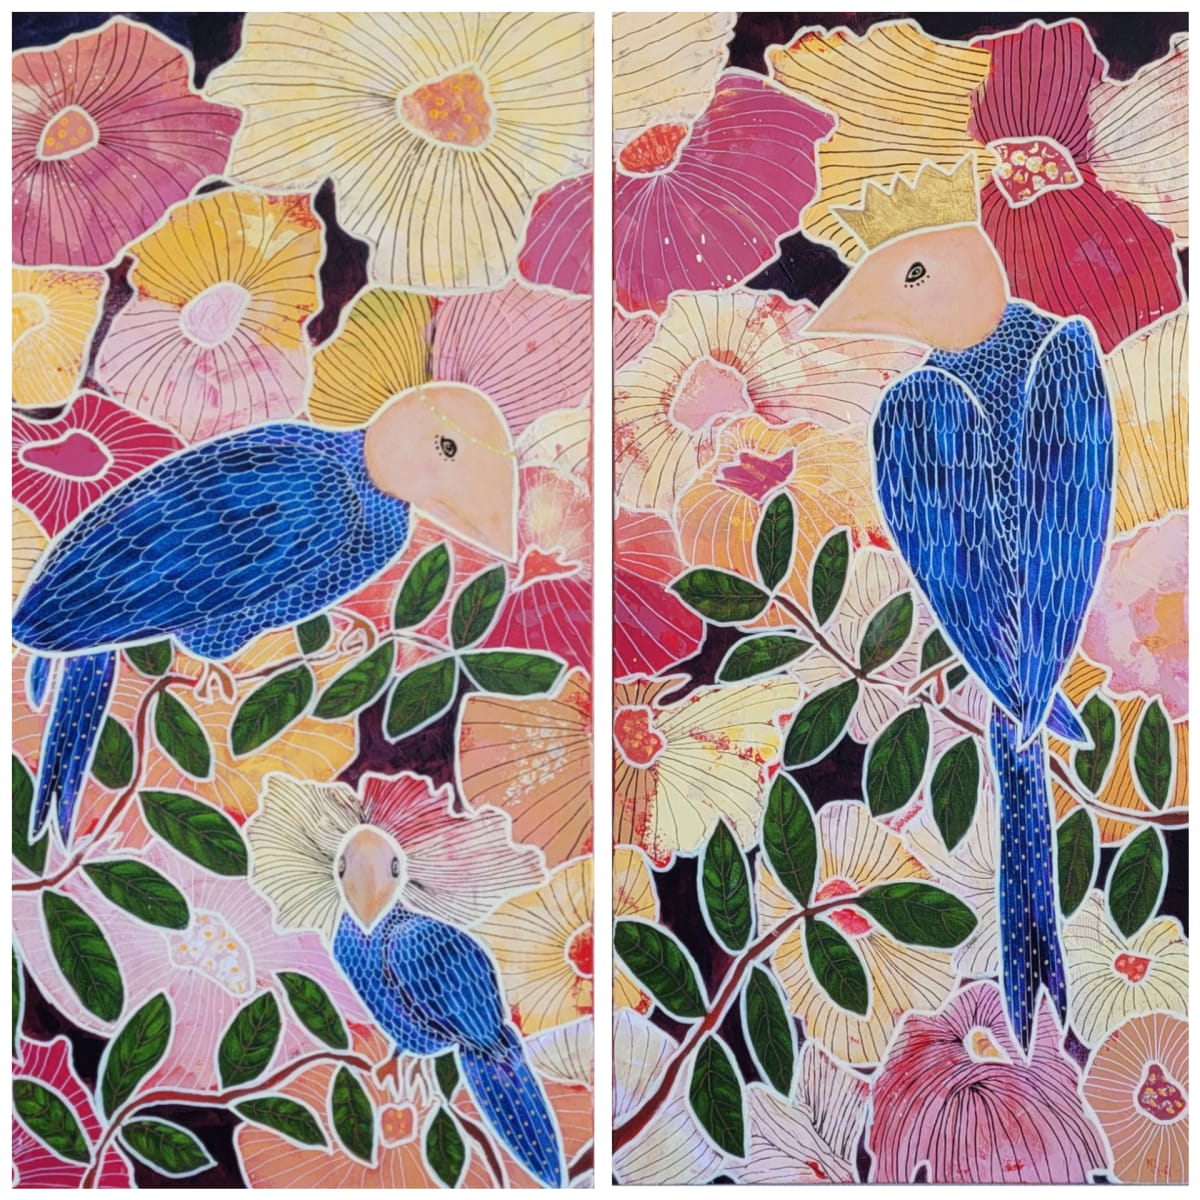 The Royal Family - diptych by Sylvie Bart  Image: The Royal Family - diptych